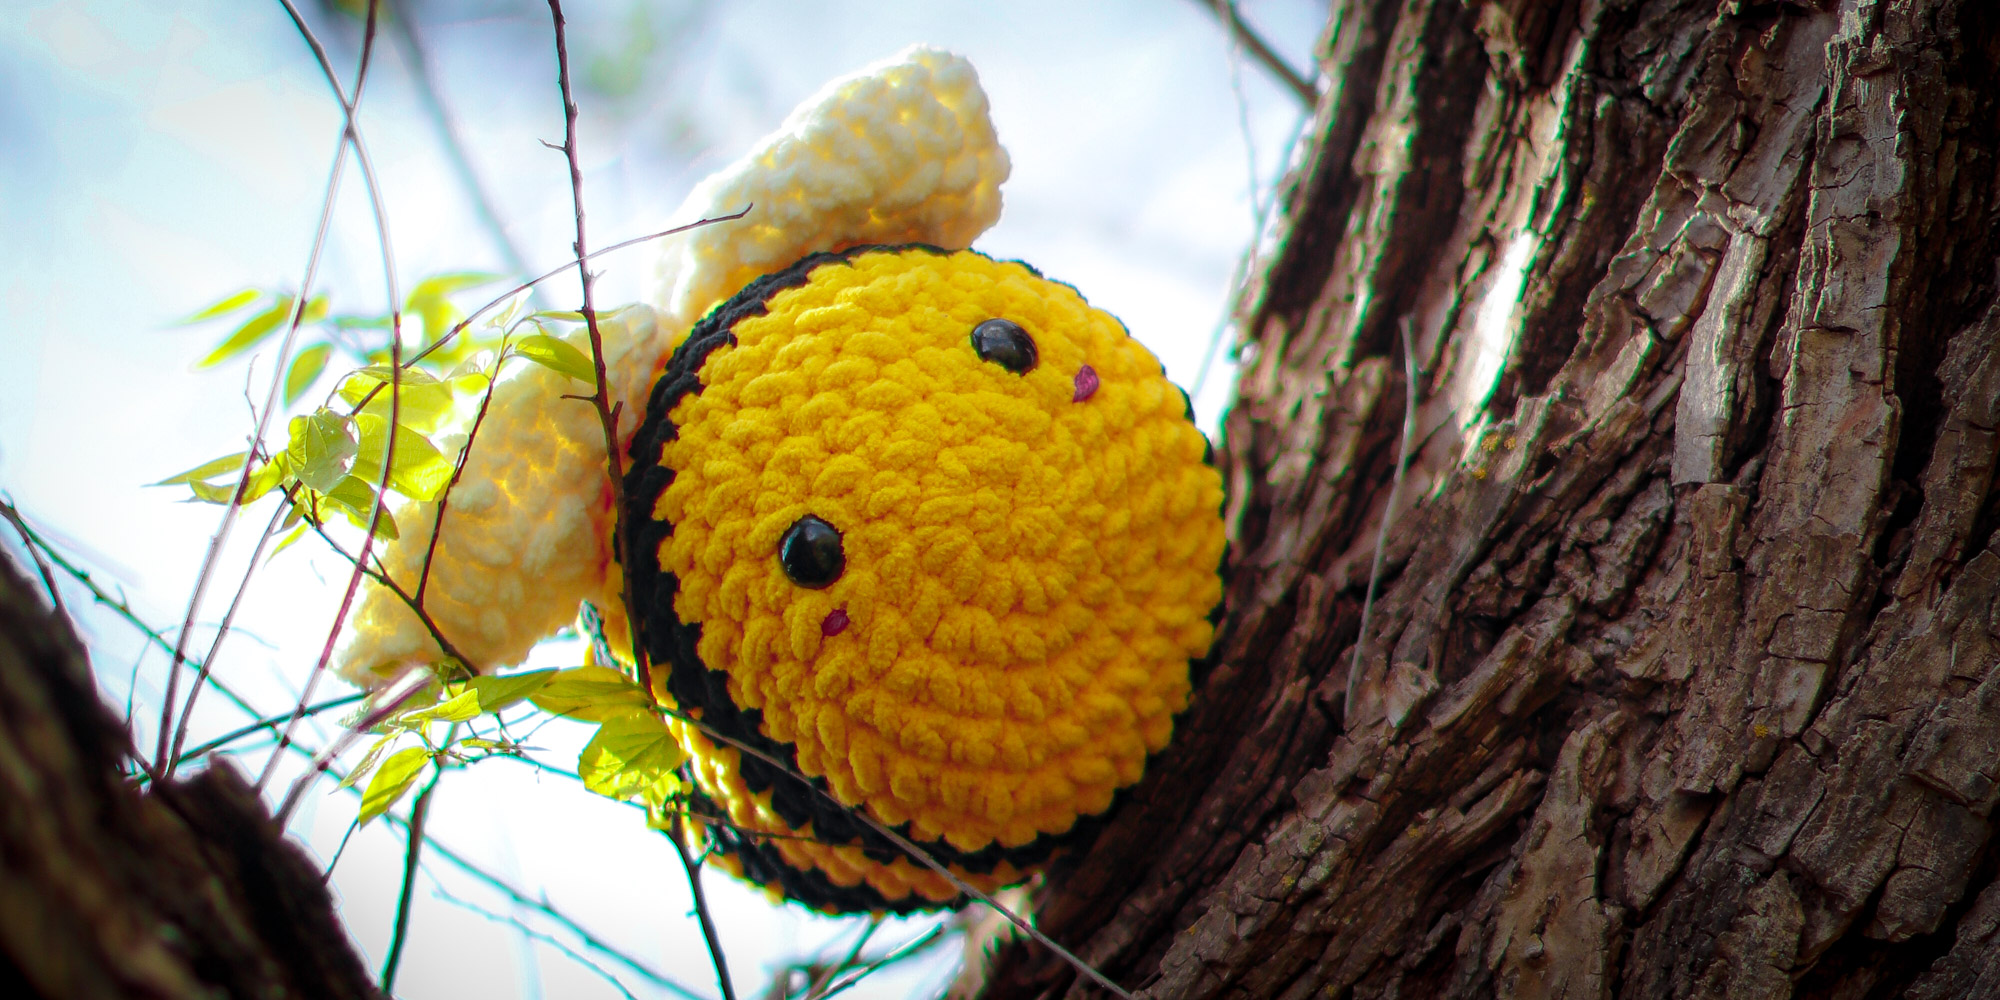 A single yellow bee perches atop a willow tree. These bulbous bees have a softness to the touch which customers rave about, yet justaposing them against the hard bark of nature both emphasizes how the product reflects the natural world, and how it contains a softness often lacking there.